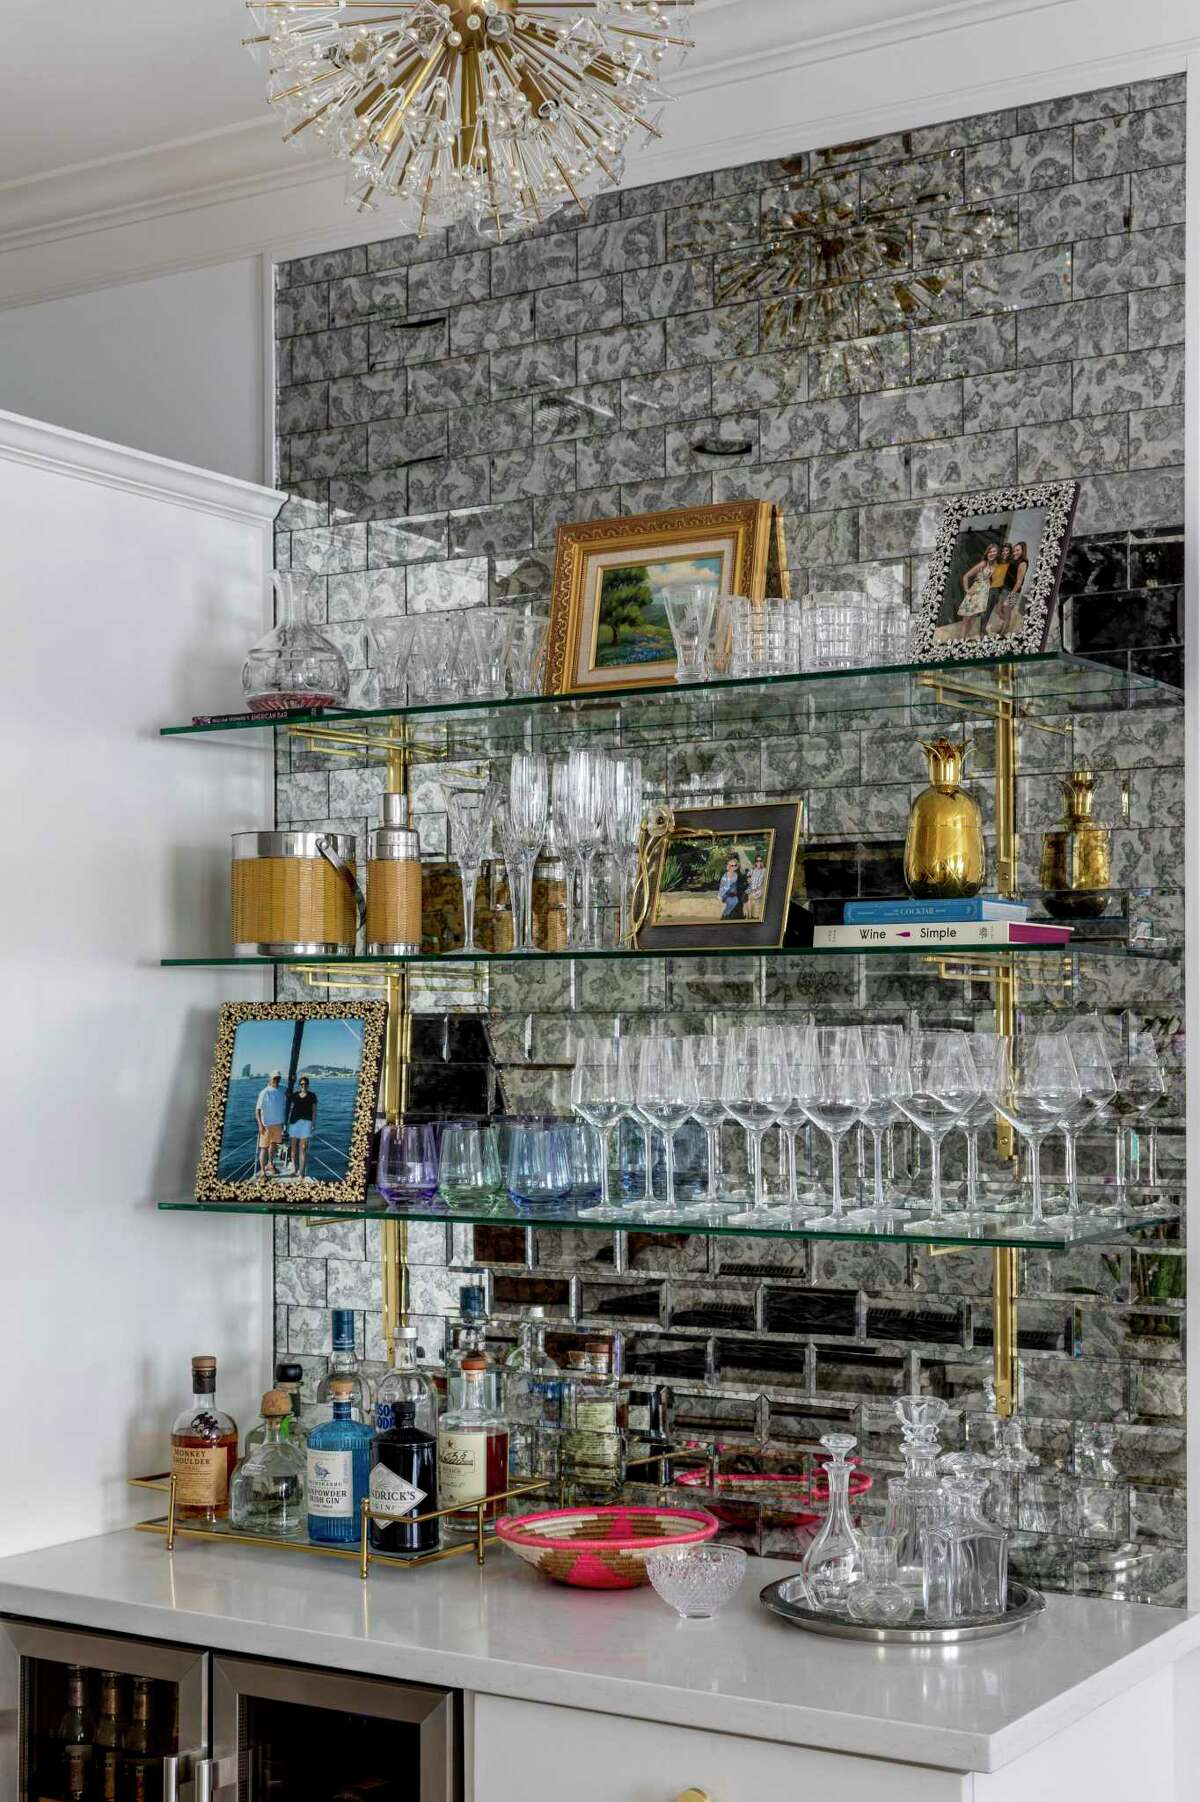 What used to be a small desk was reinvented as a bar with glass shelves on an antique mirror tiled wall.